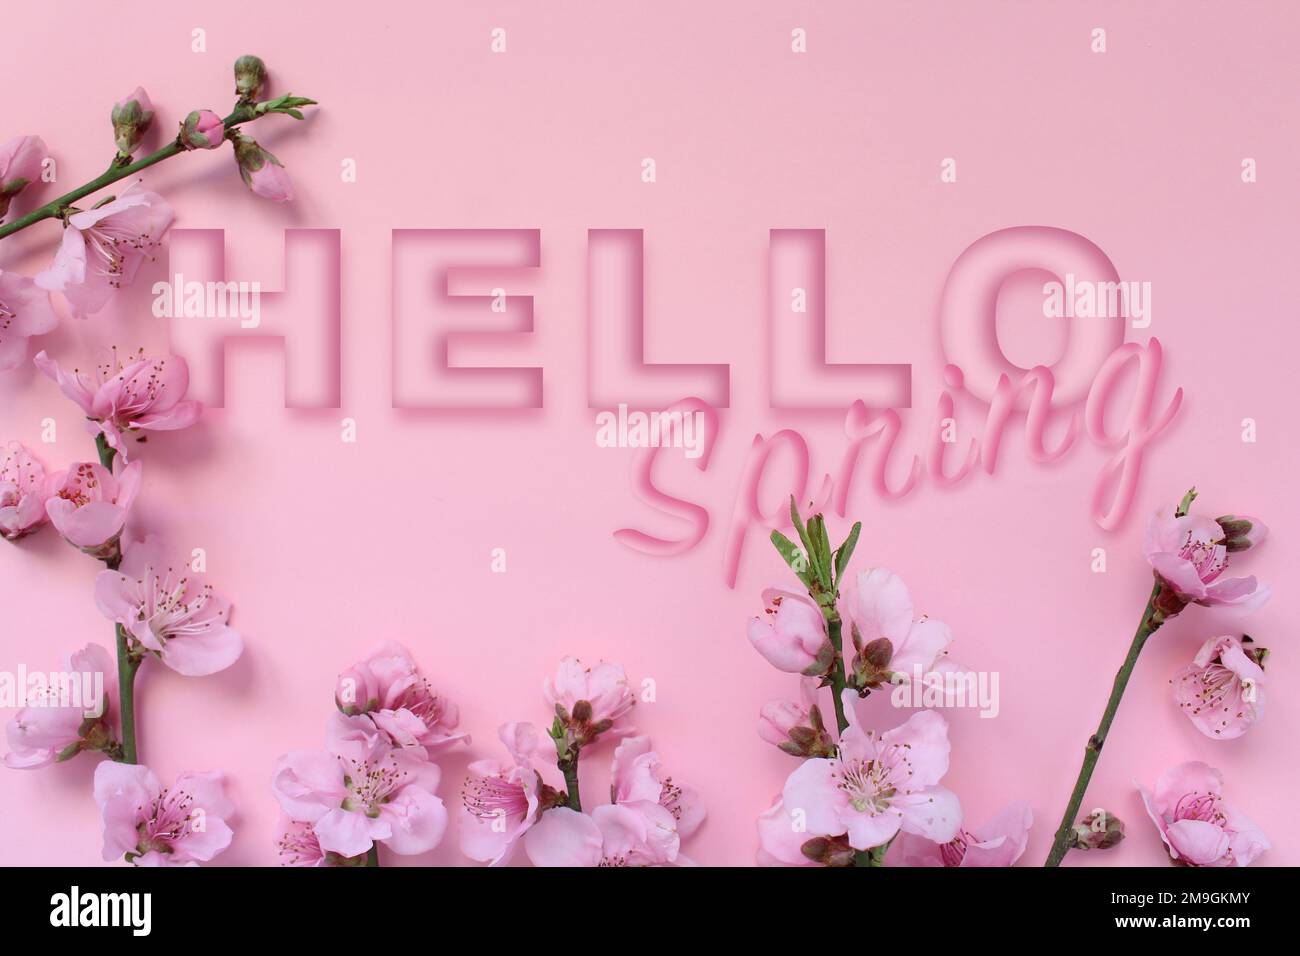 Spring concept idea. Blossom tree branch and text 'Hello Spring' isolated on pink background. Stock Photo